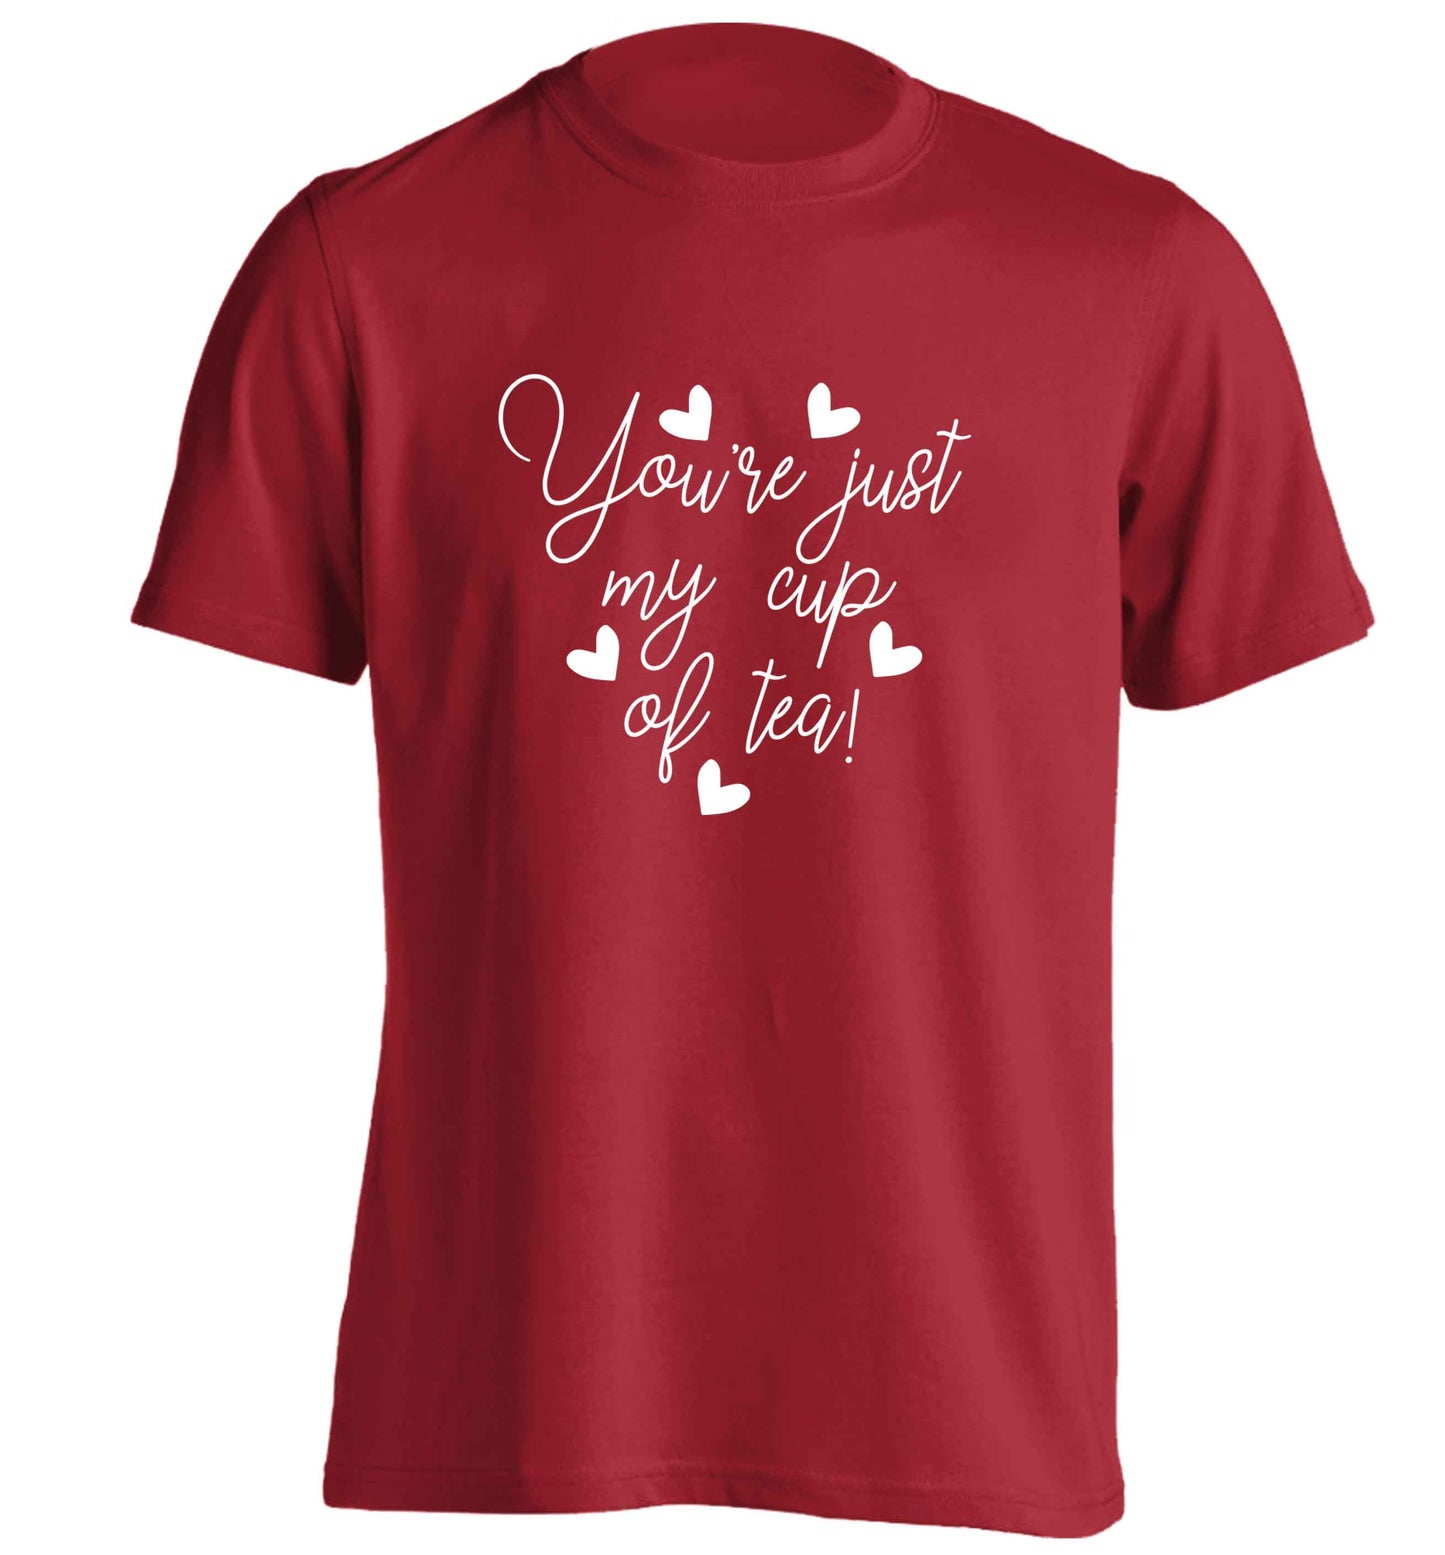 You're just my cup of tea adults unisex red Tshirt 2XL